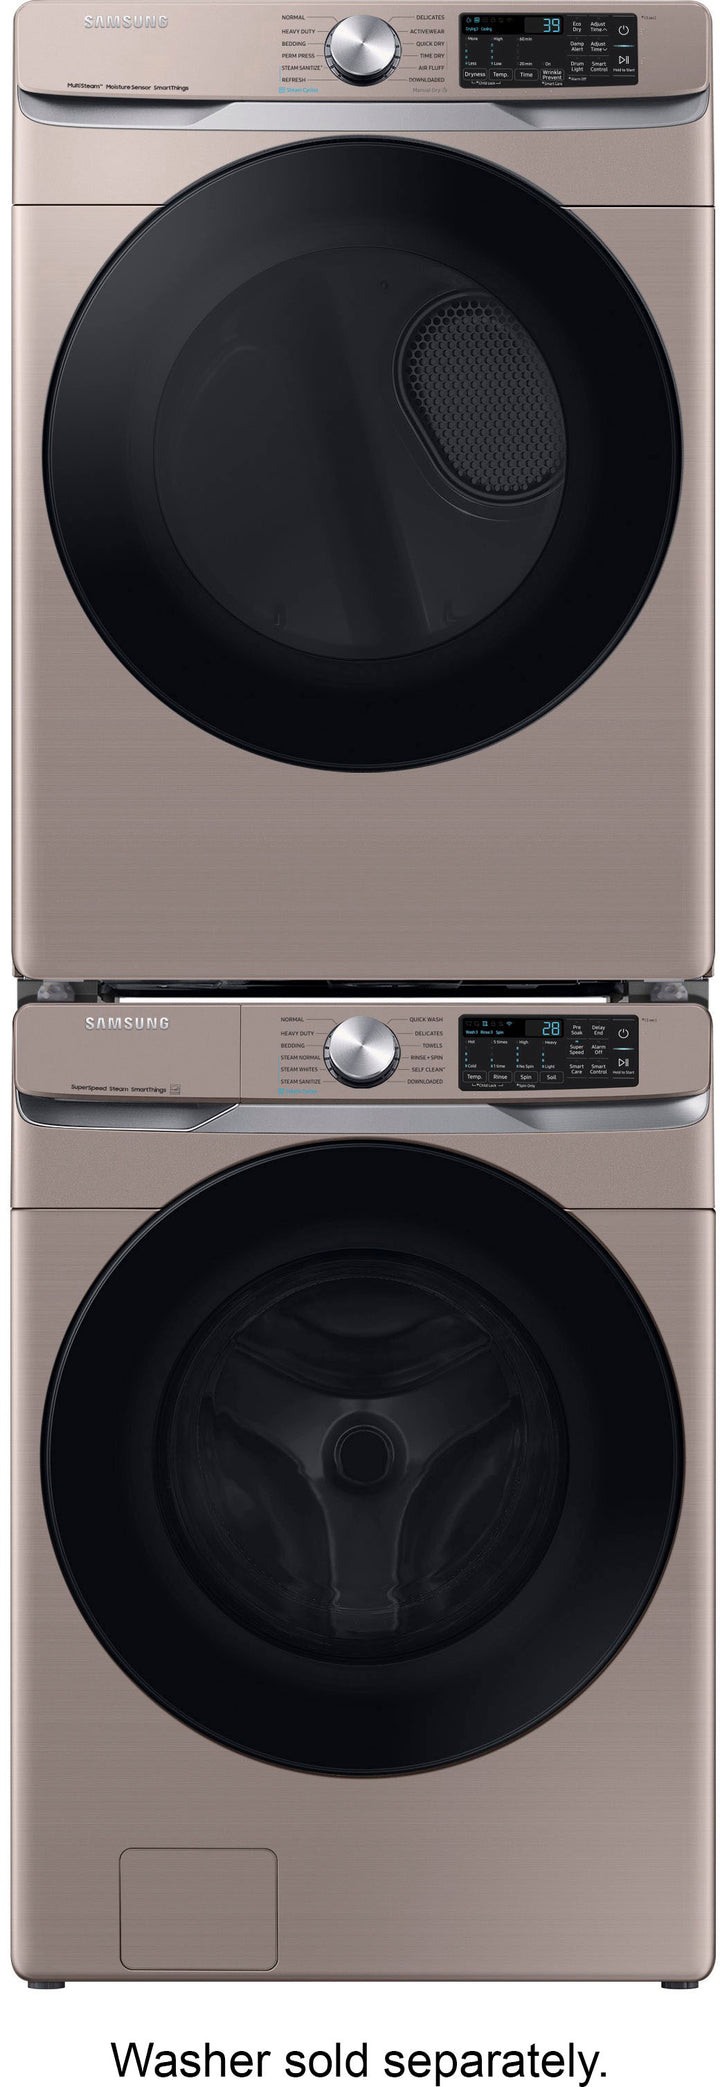 Samsung - 7.5 cu. ft. Smart Electric Dryer with Steam Sanitize+ - Champagne_2